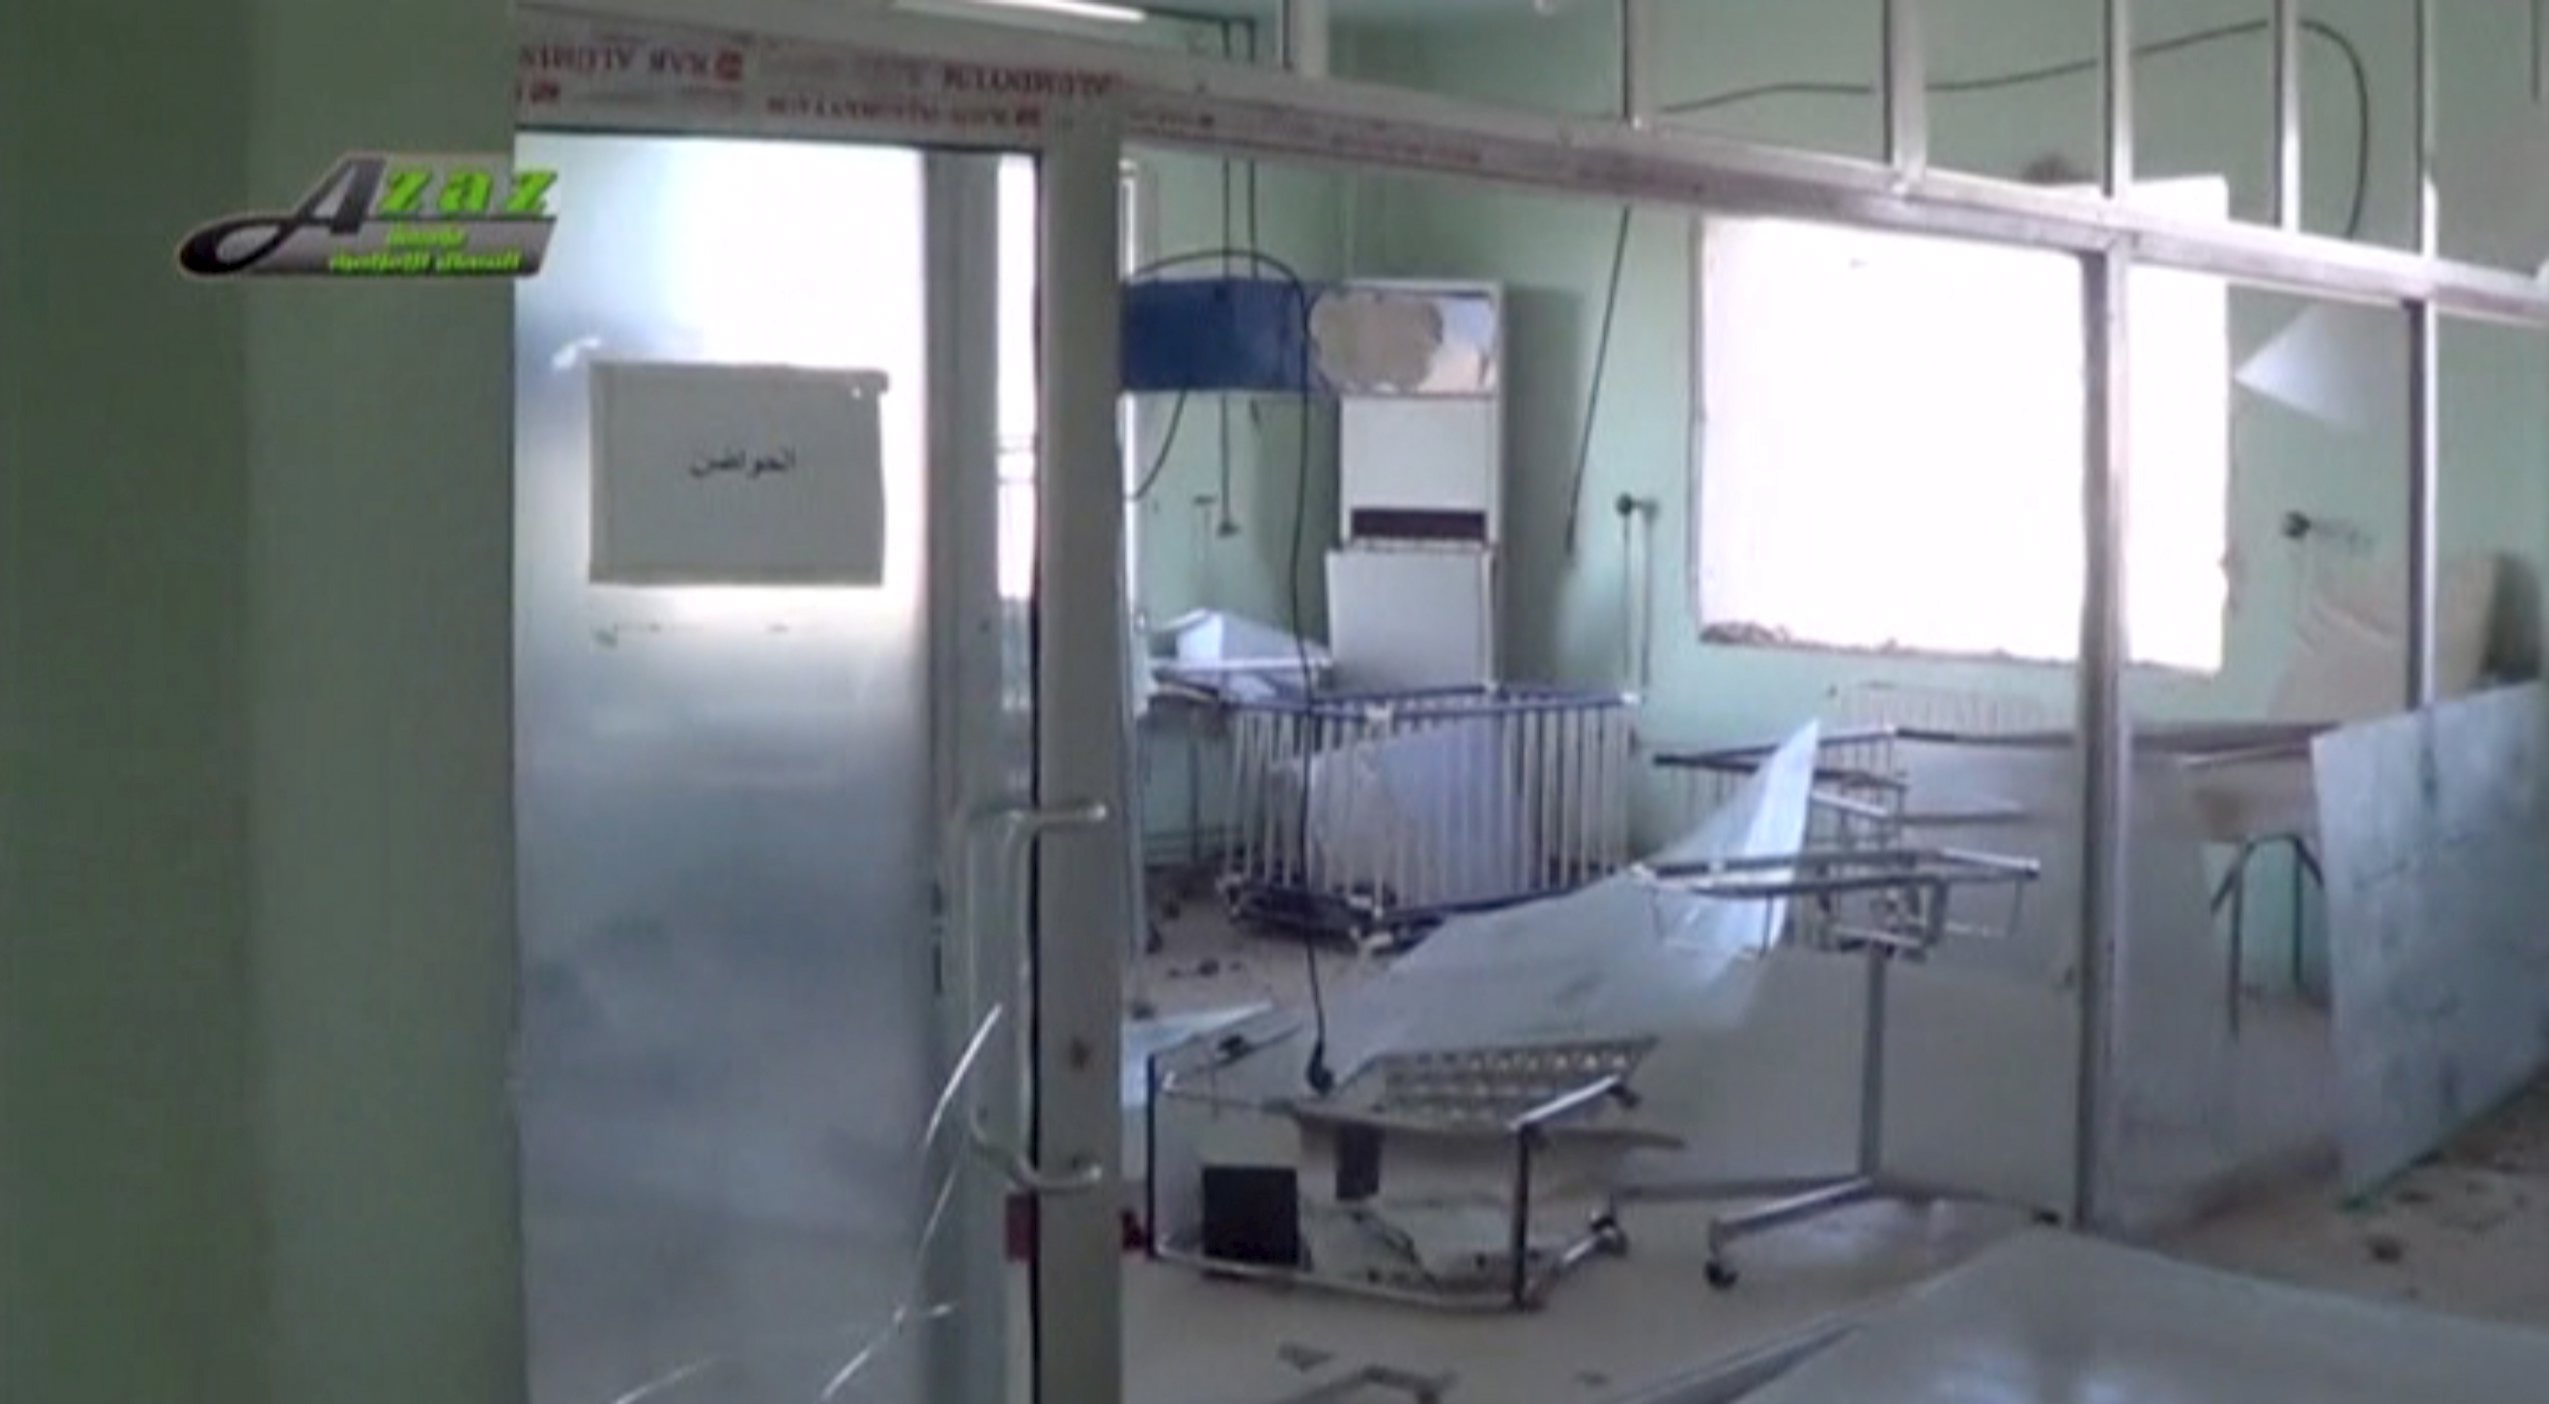 Still image taken from video shows the view of the damaged interior of what is said to be a hospital after a missile attack in Azaz